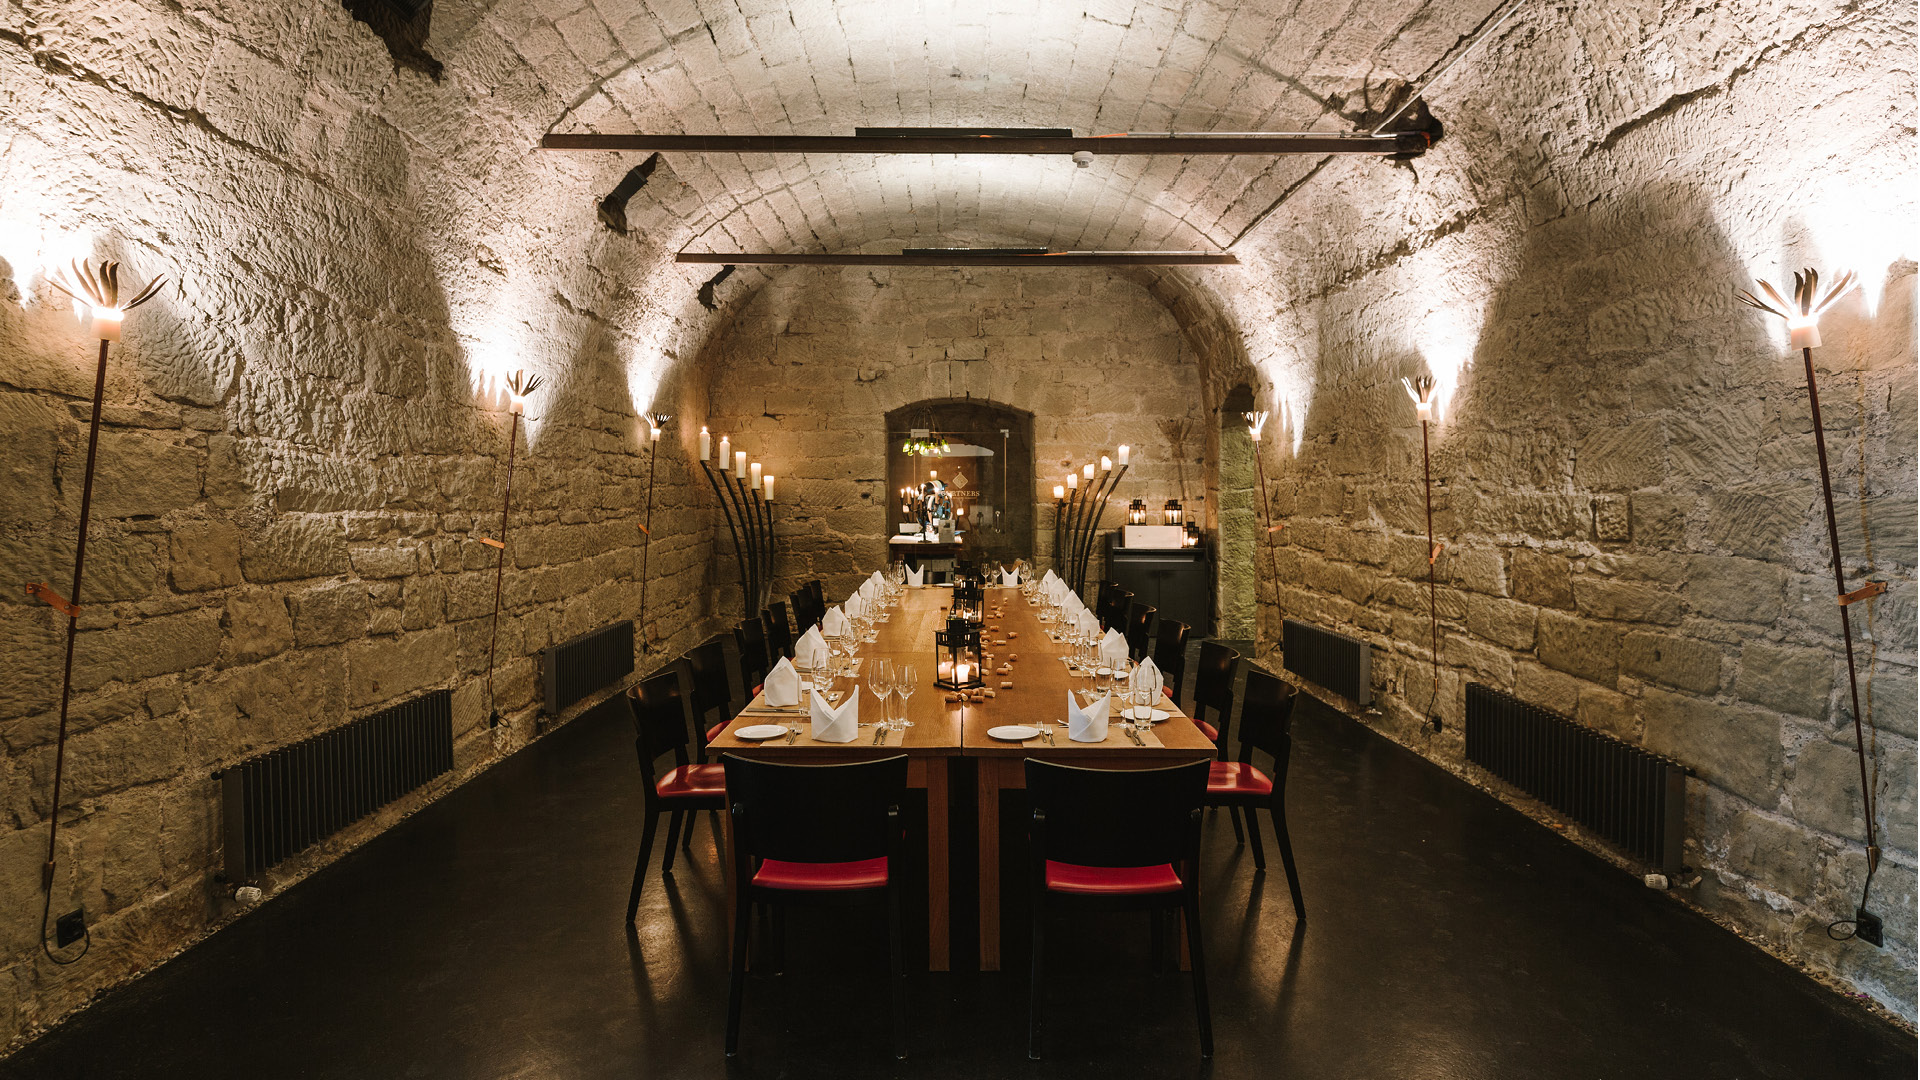 Festively laid boardroom table in the vaulted cellar